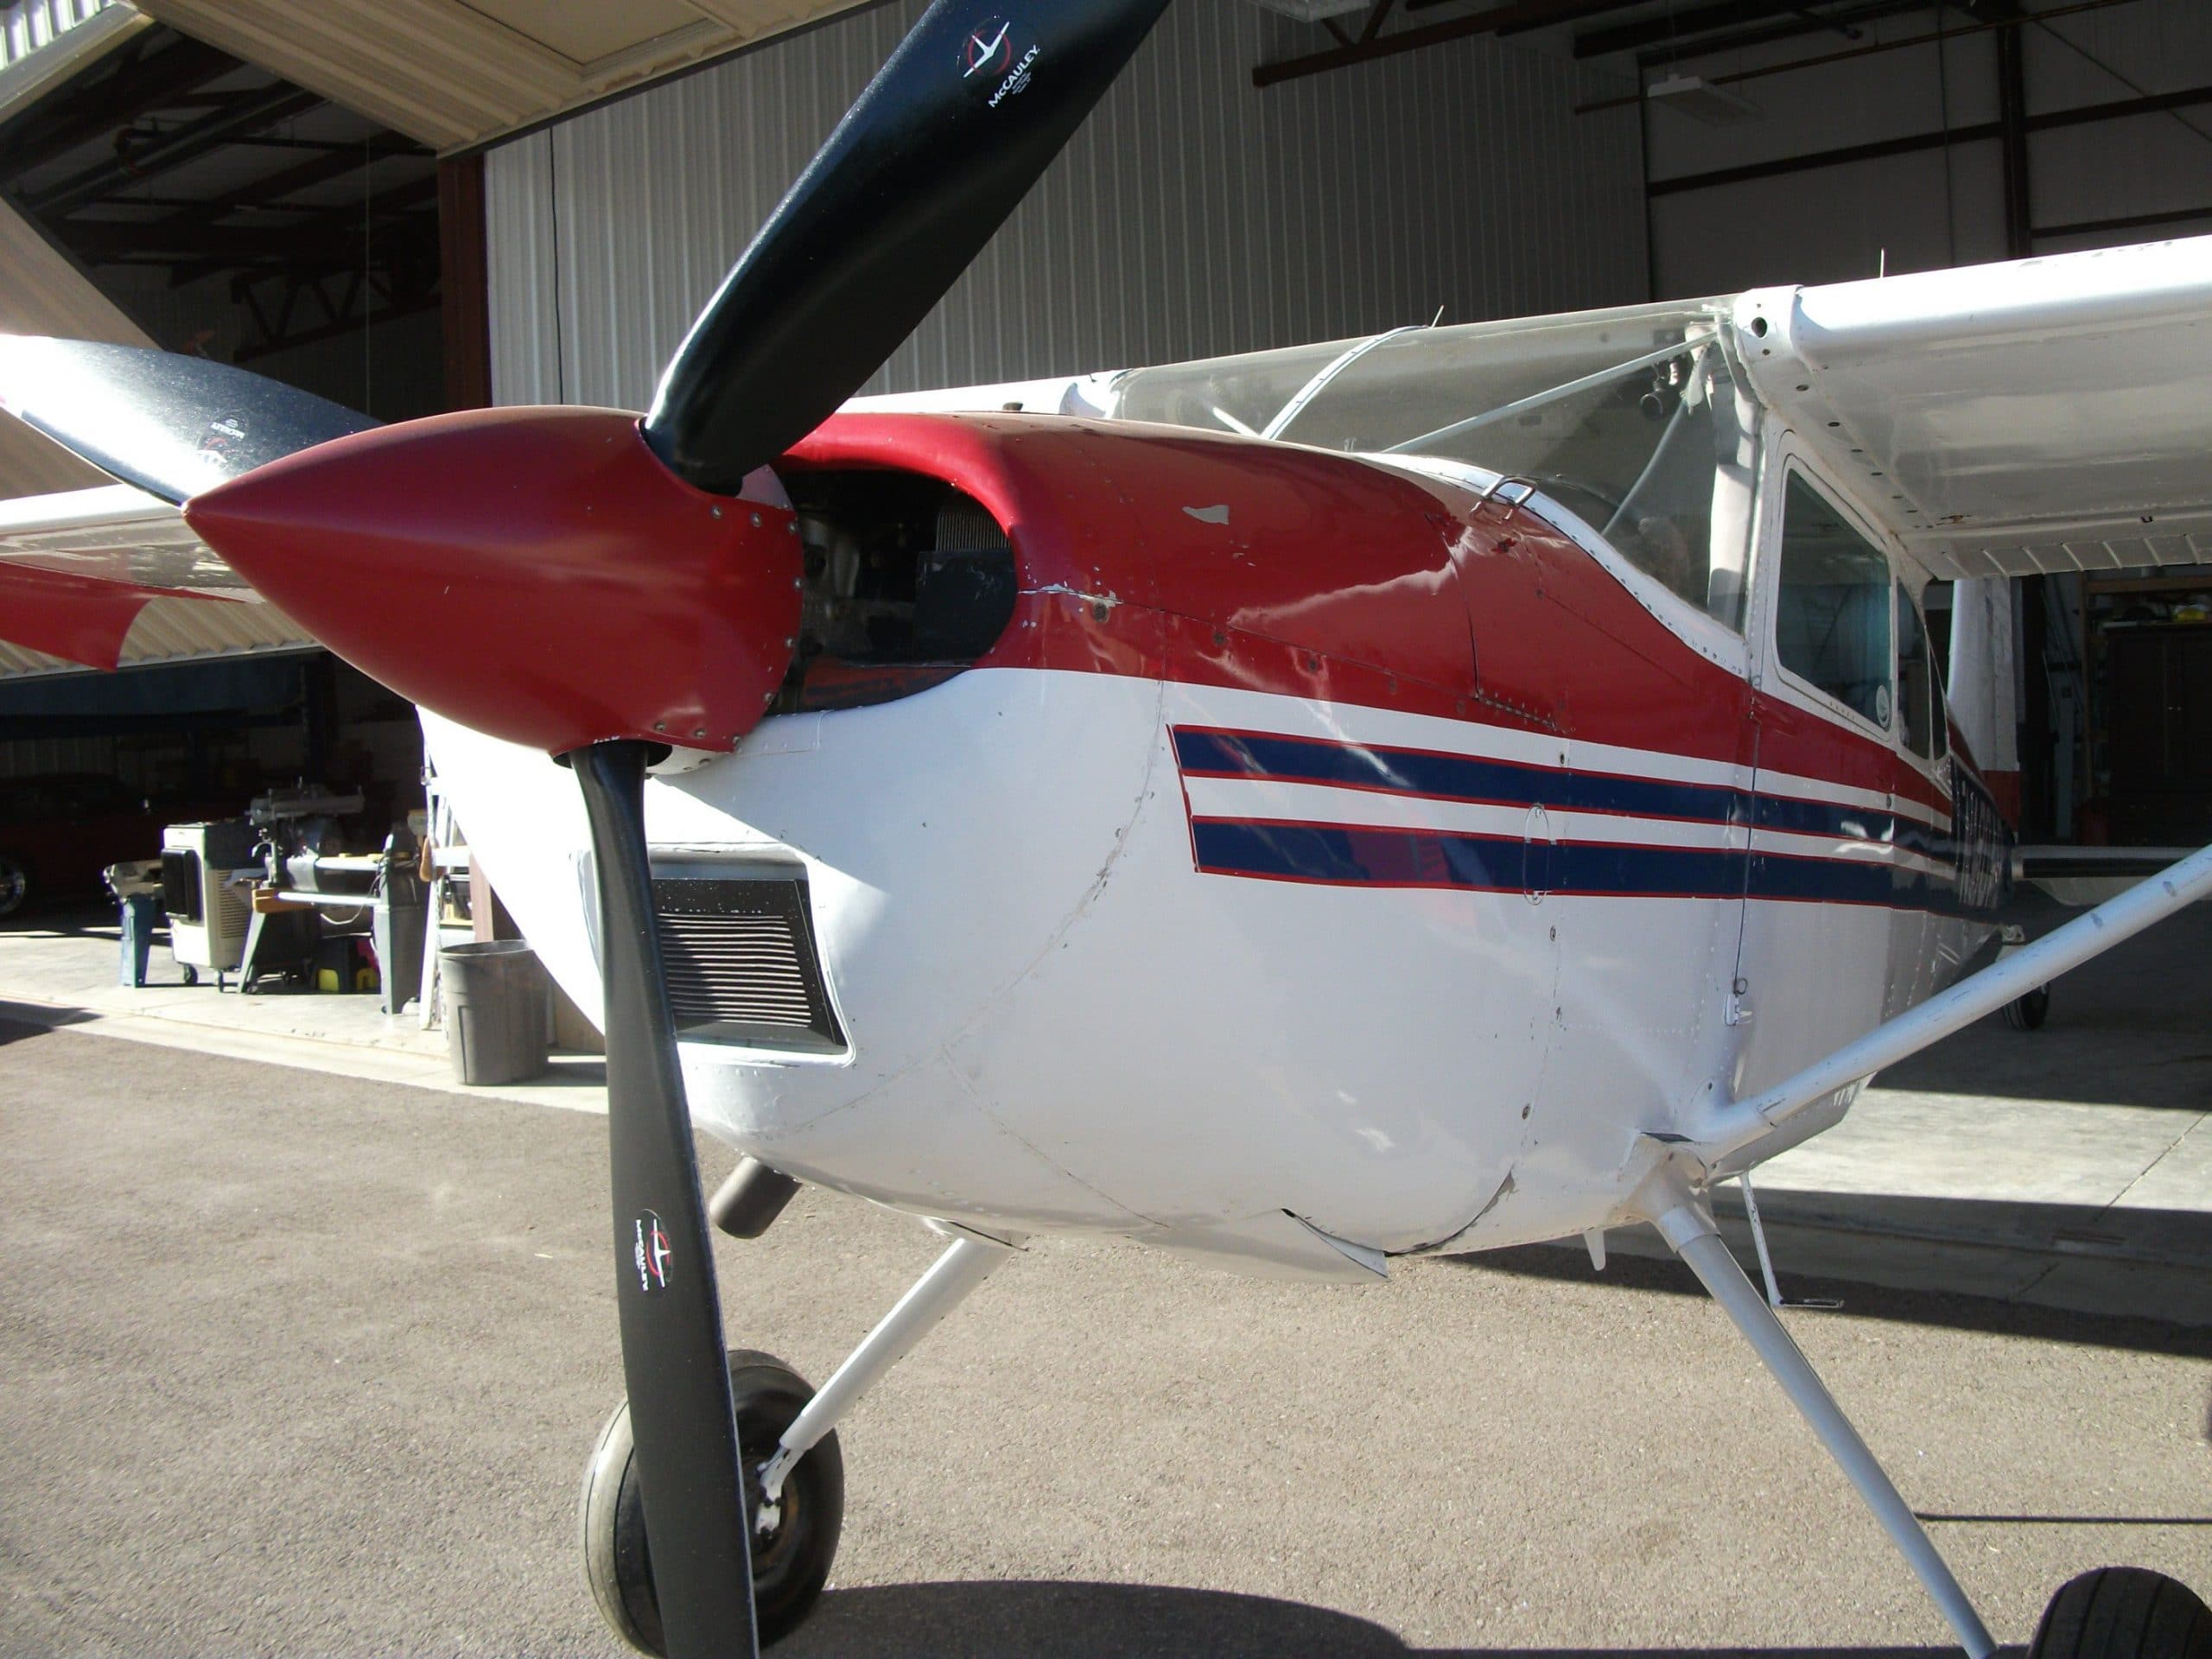 Best aircraft detailing services in Arizona for single-engine planes